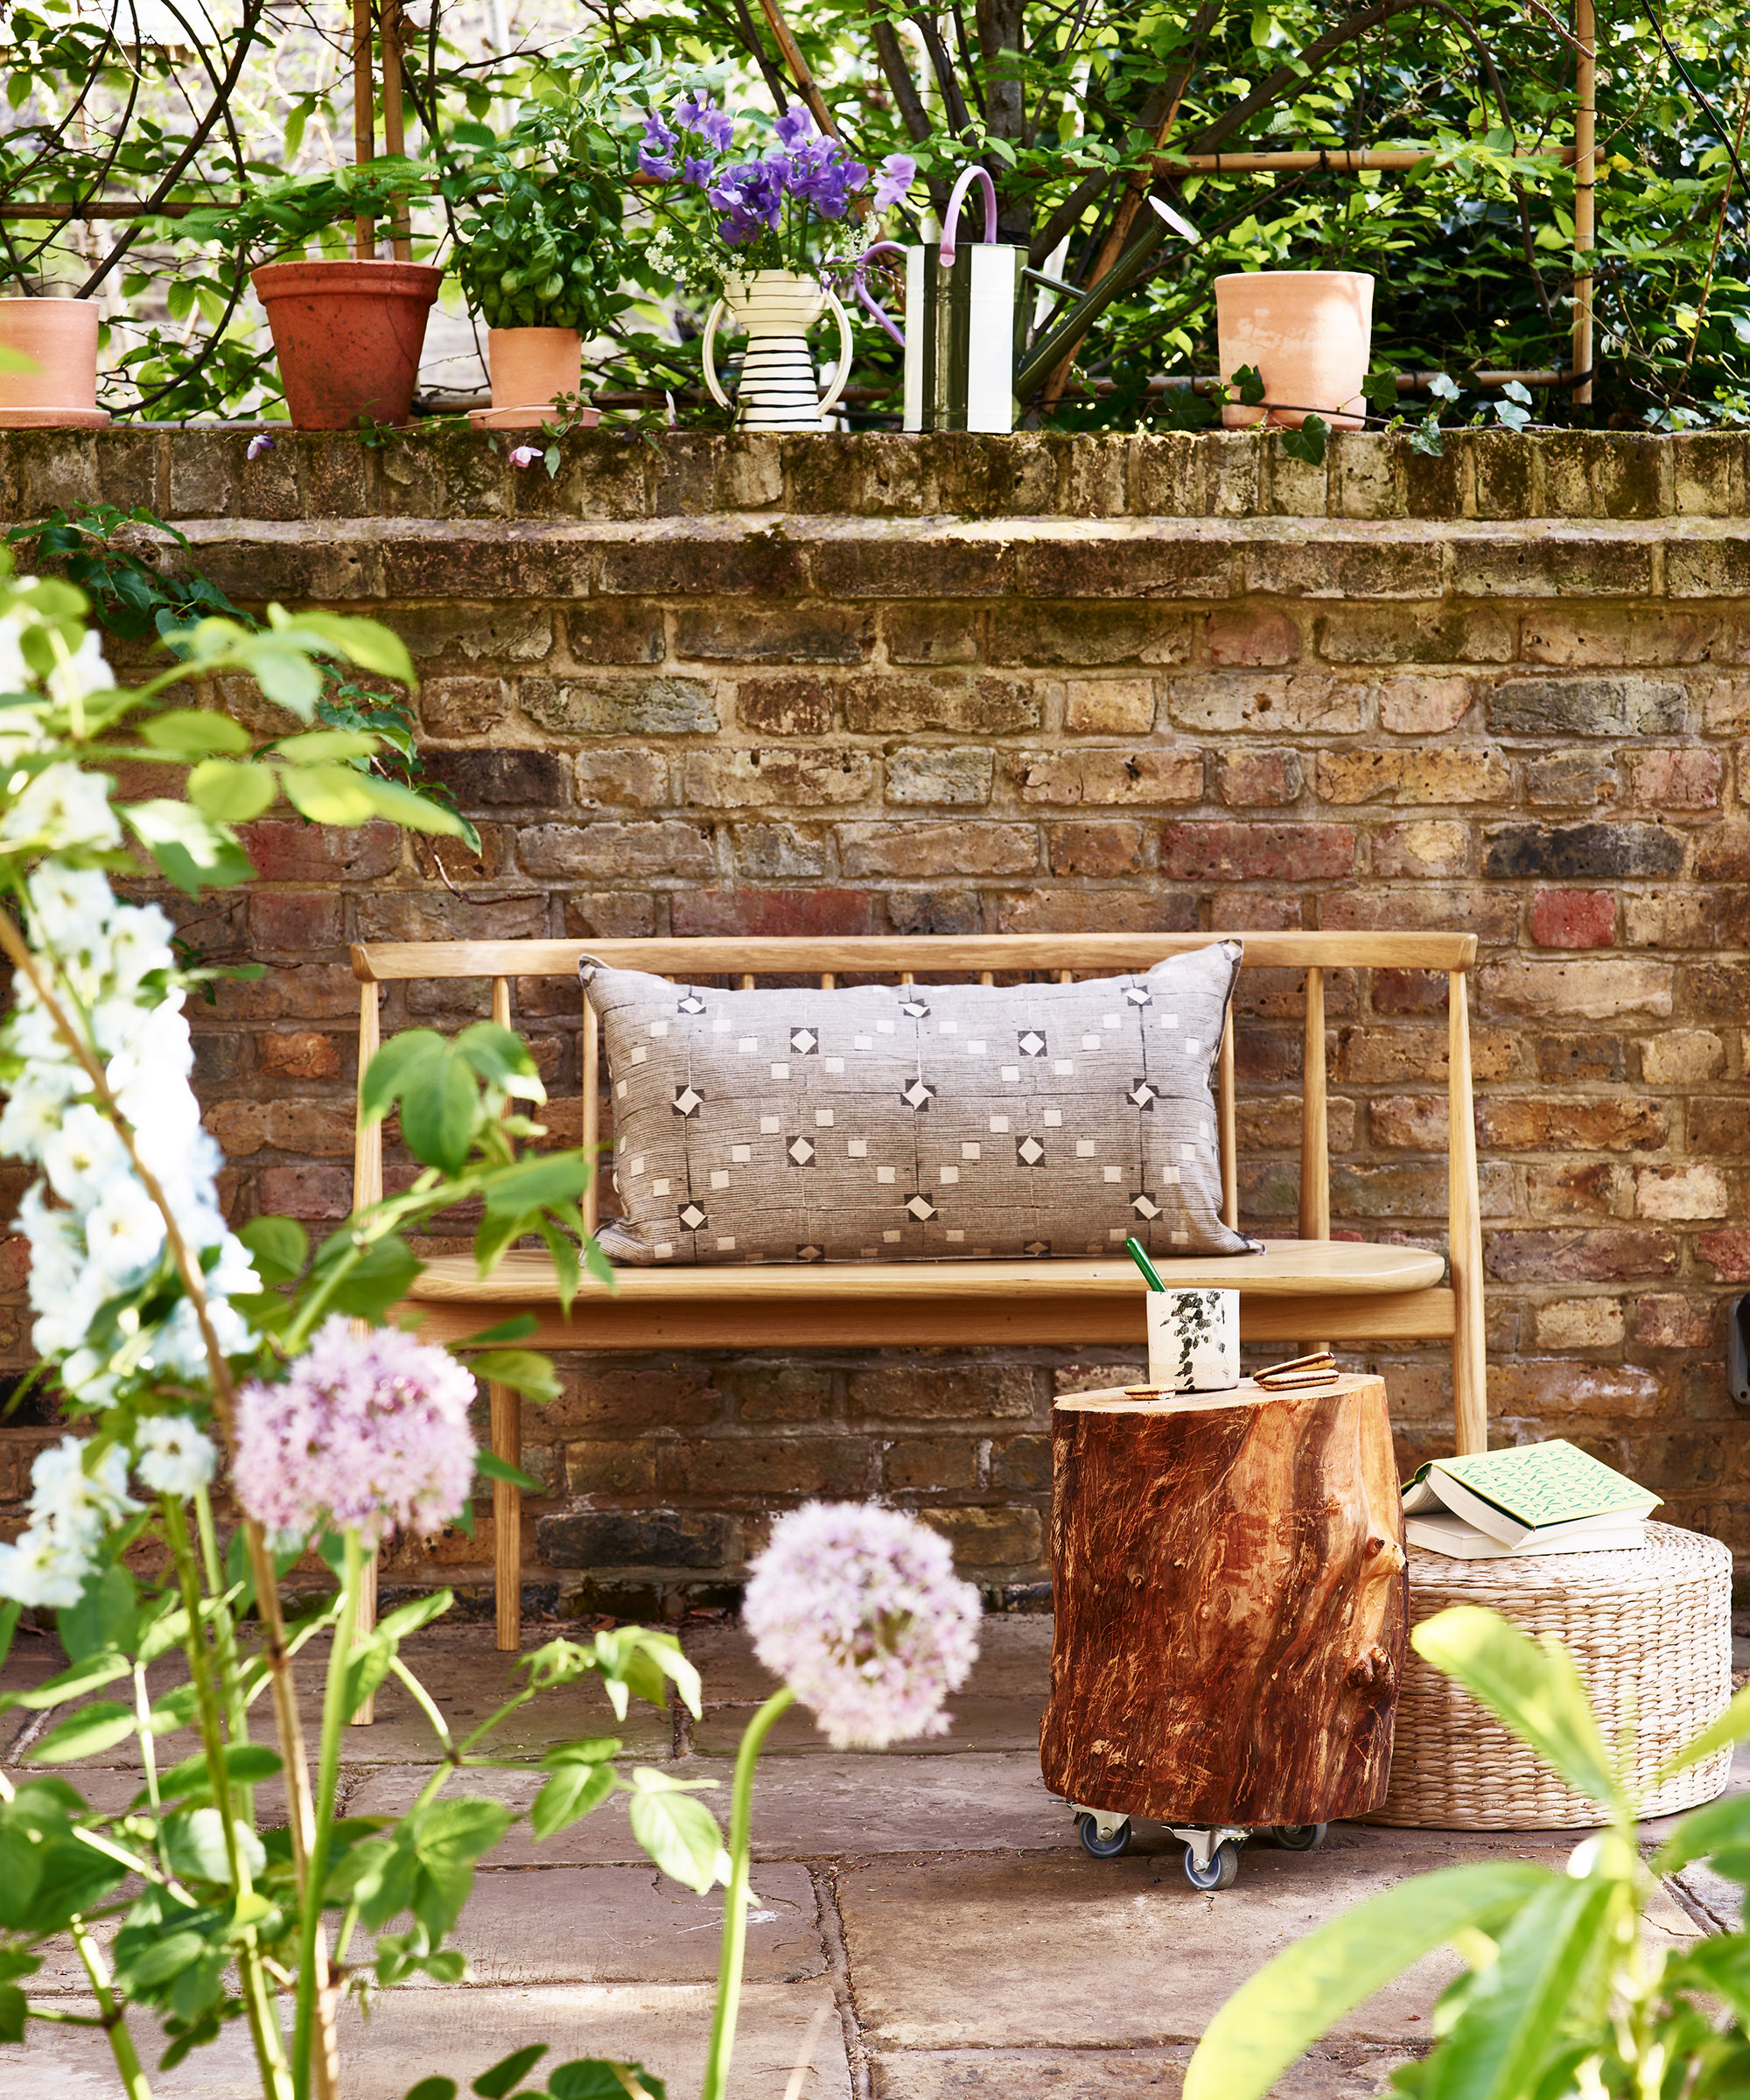 Wooden bench in front of garden wall with potted plants around a stump table